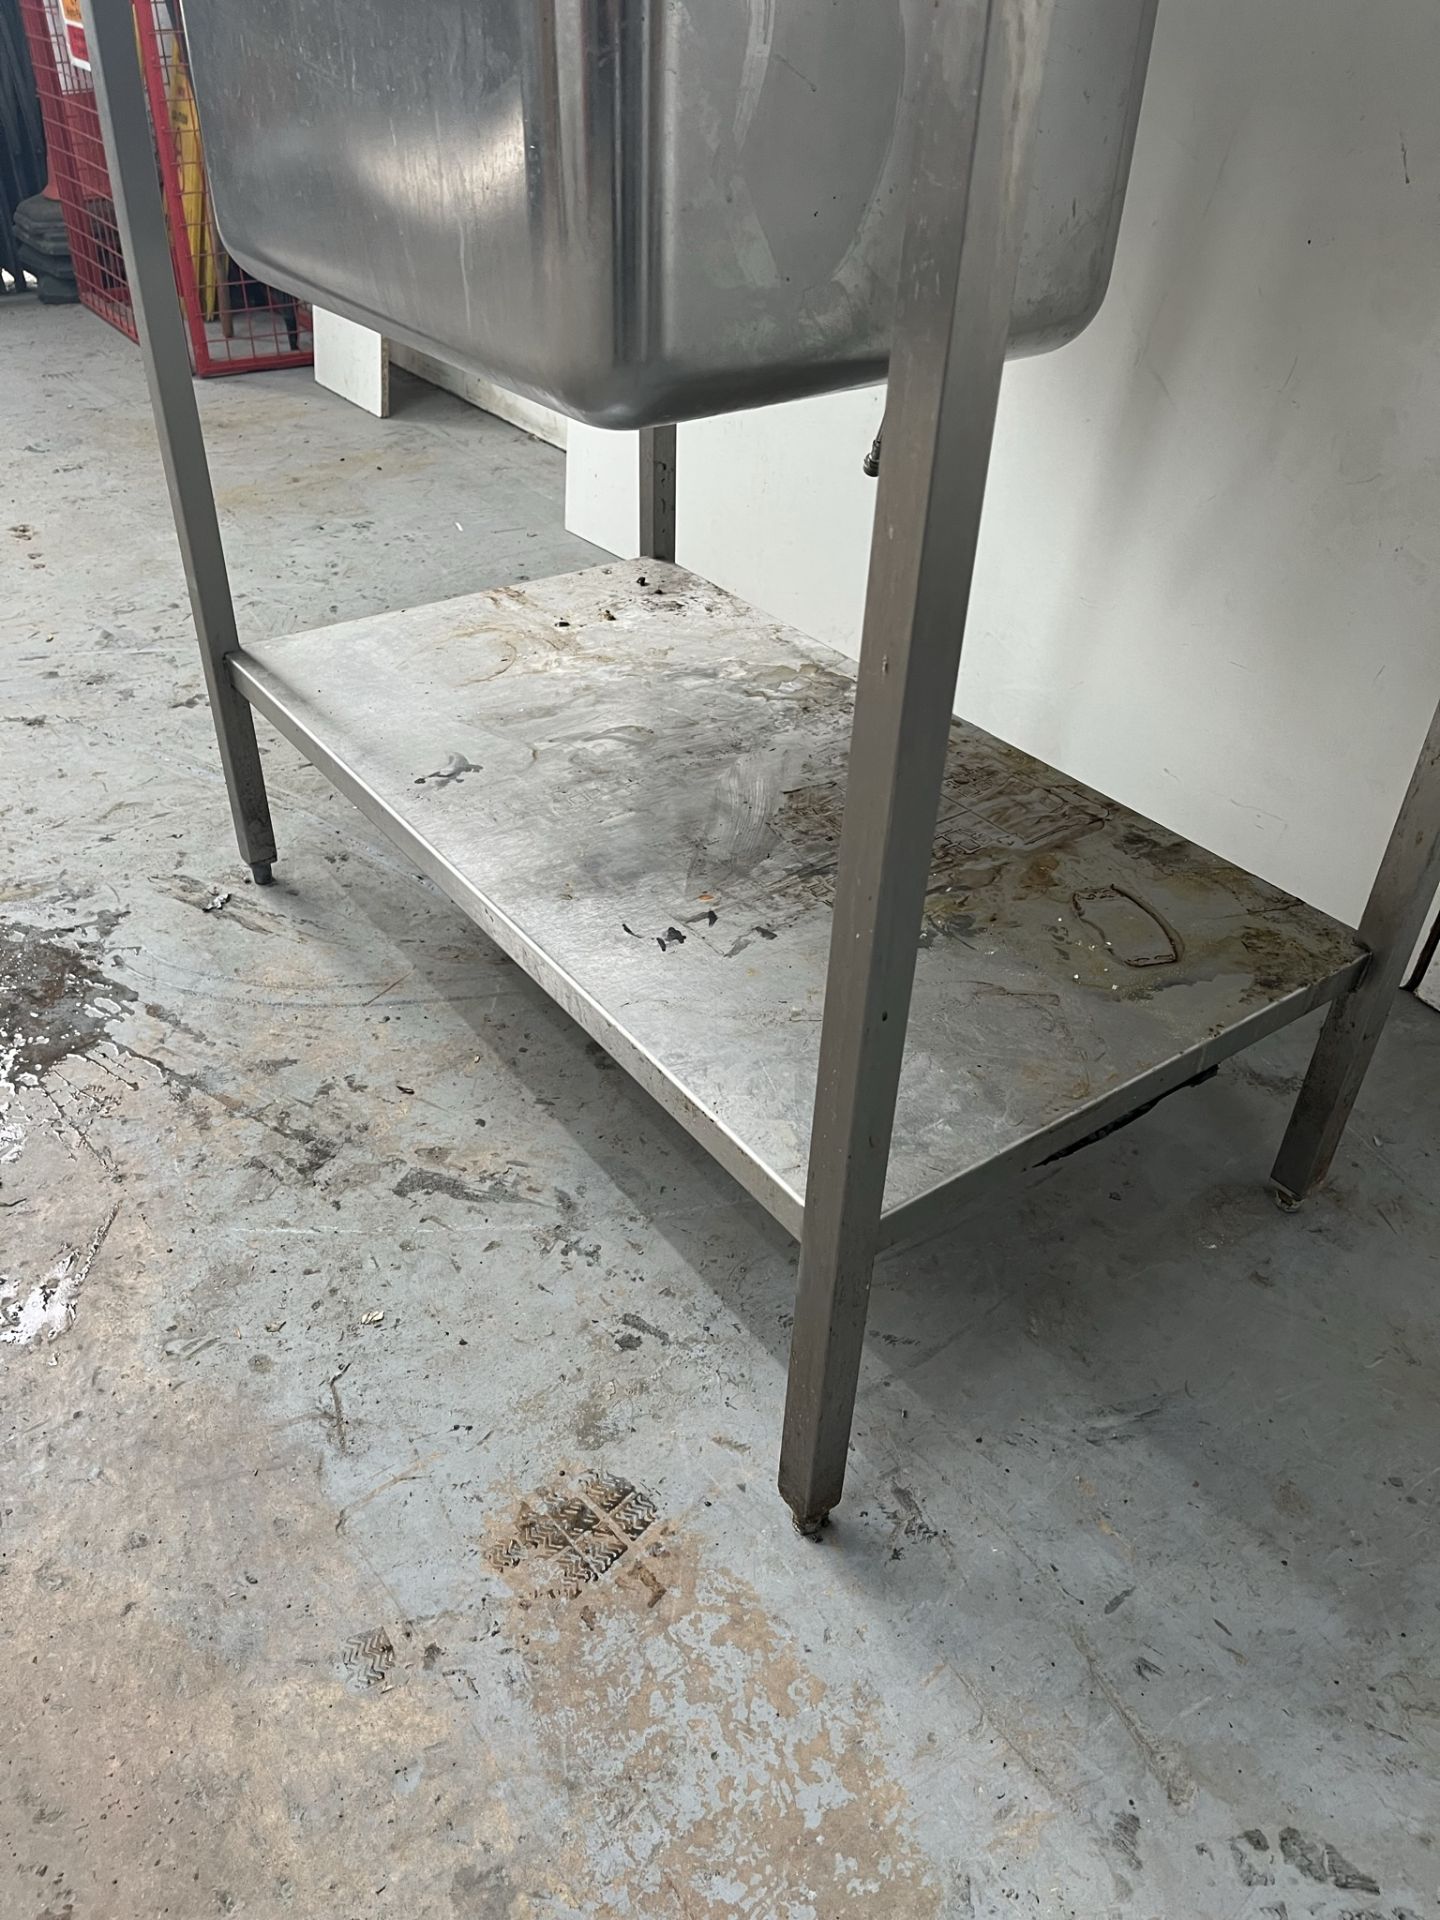 Commercial Stainless Steel Catering Table With Pre Rinse Tap & Sink - Image 10 of 24